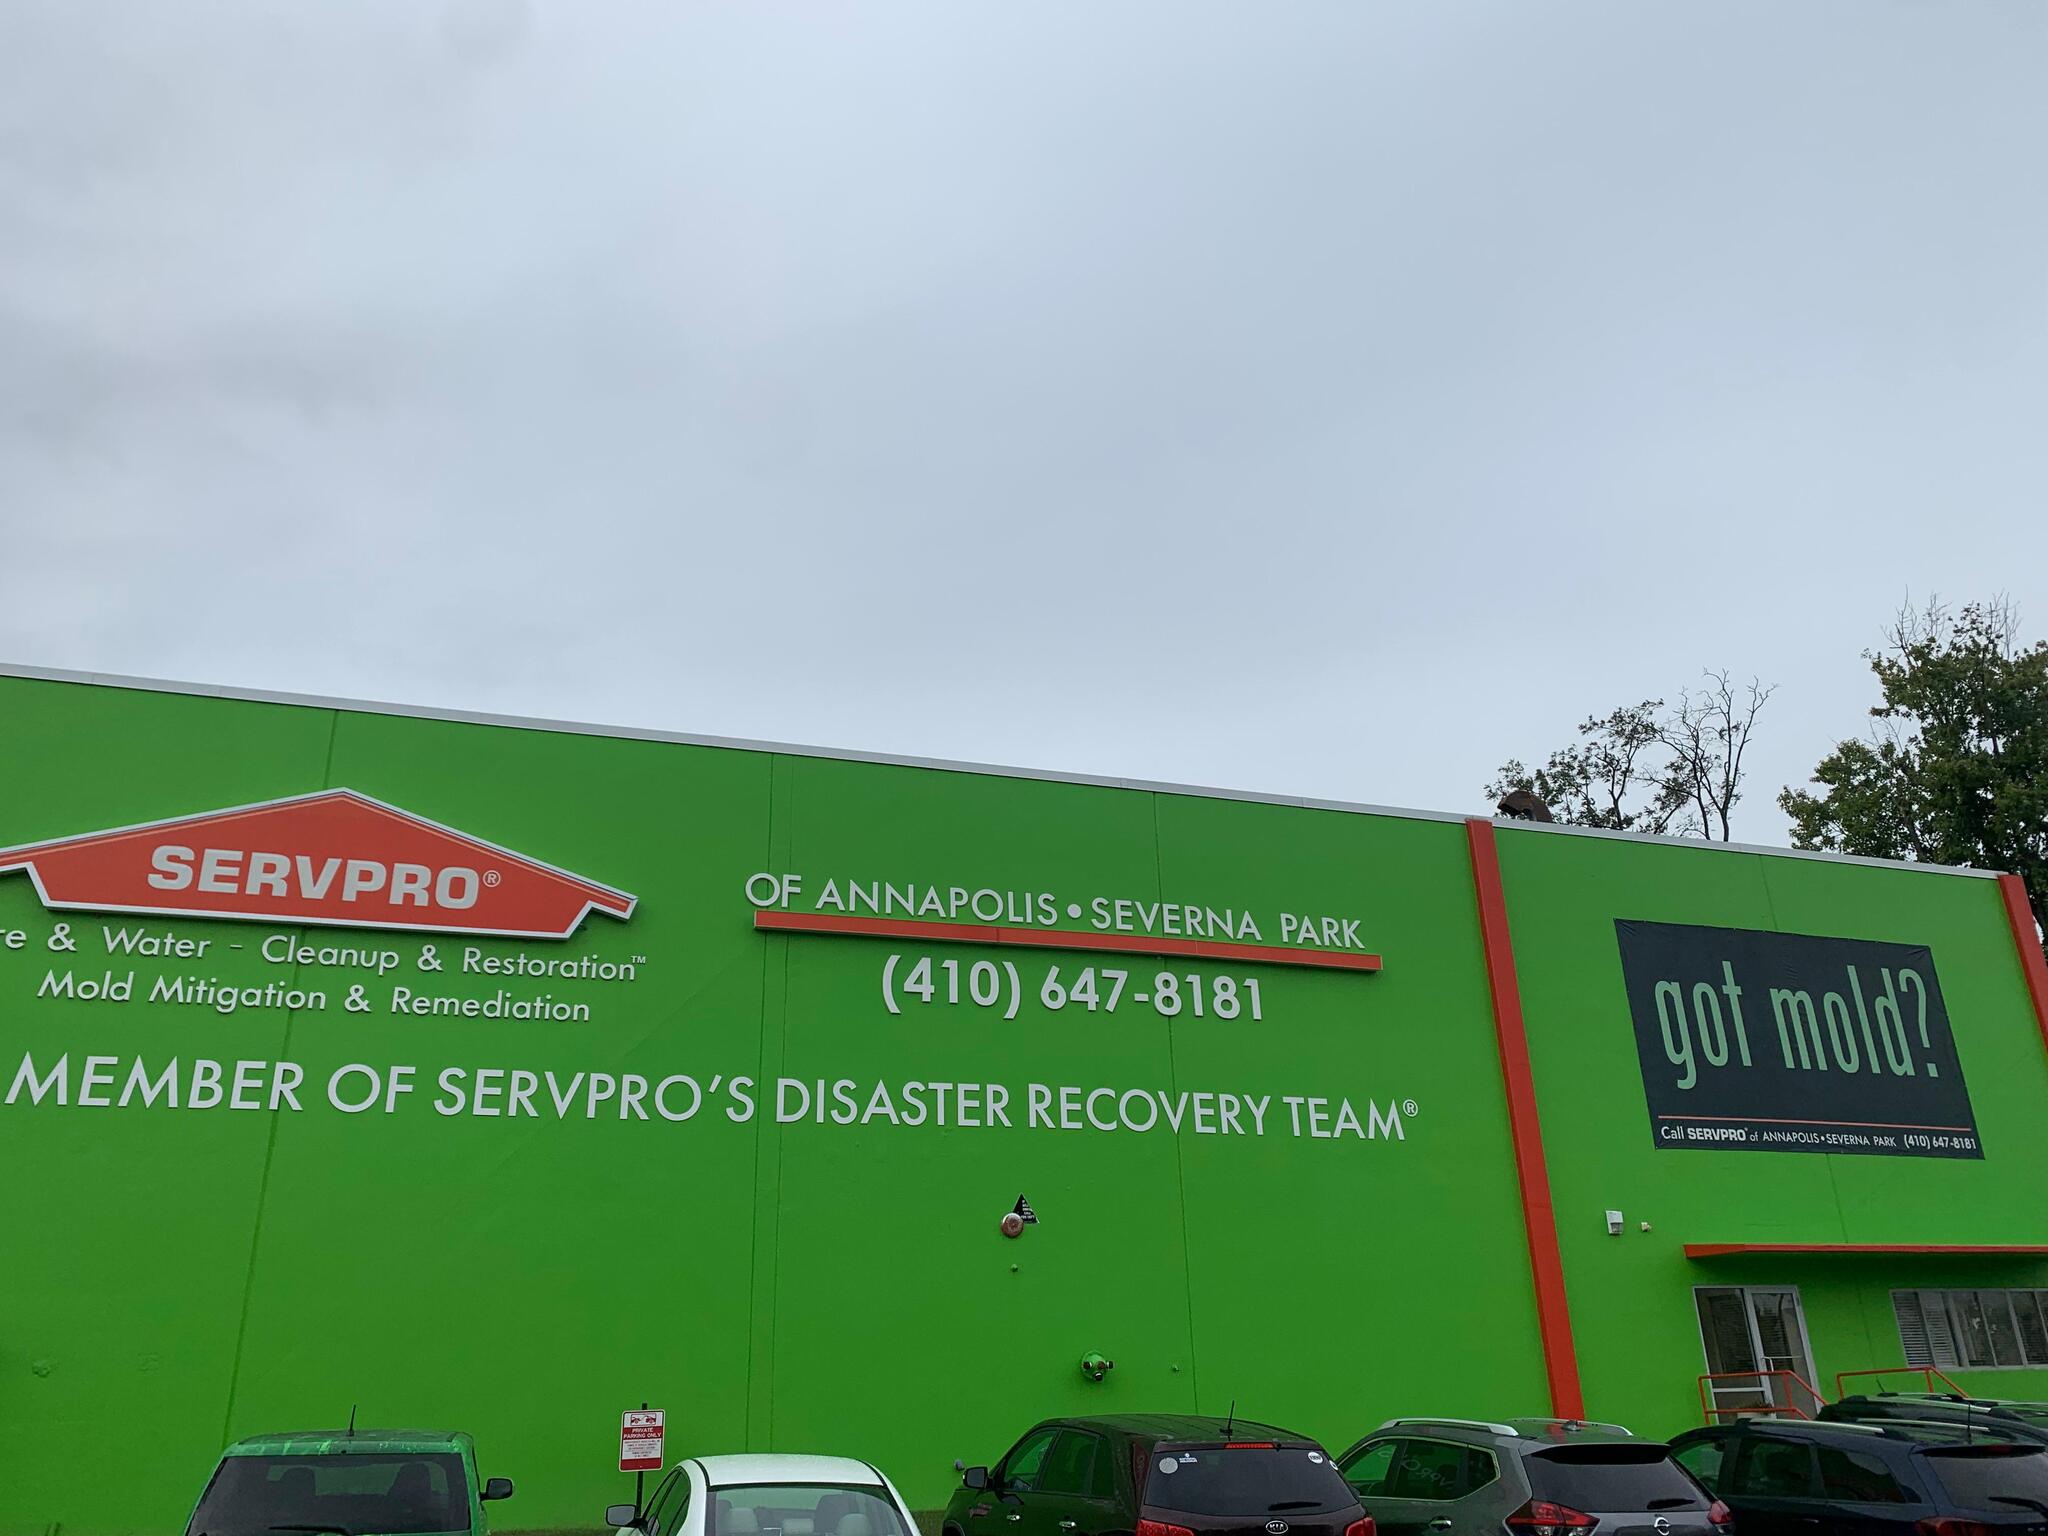 SERVPRO of Annapolis/Severna Park 1446 Ritchie Hwy, Arnold Maryland 21012